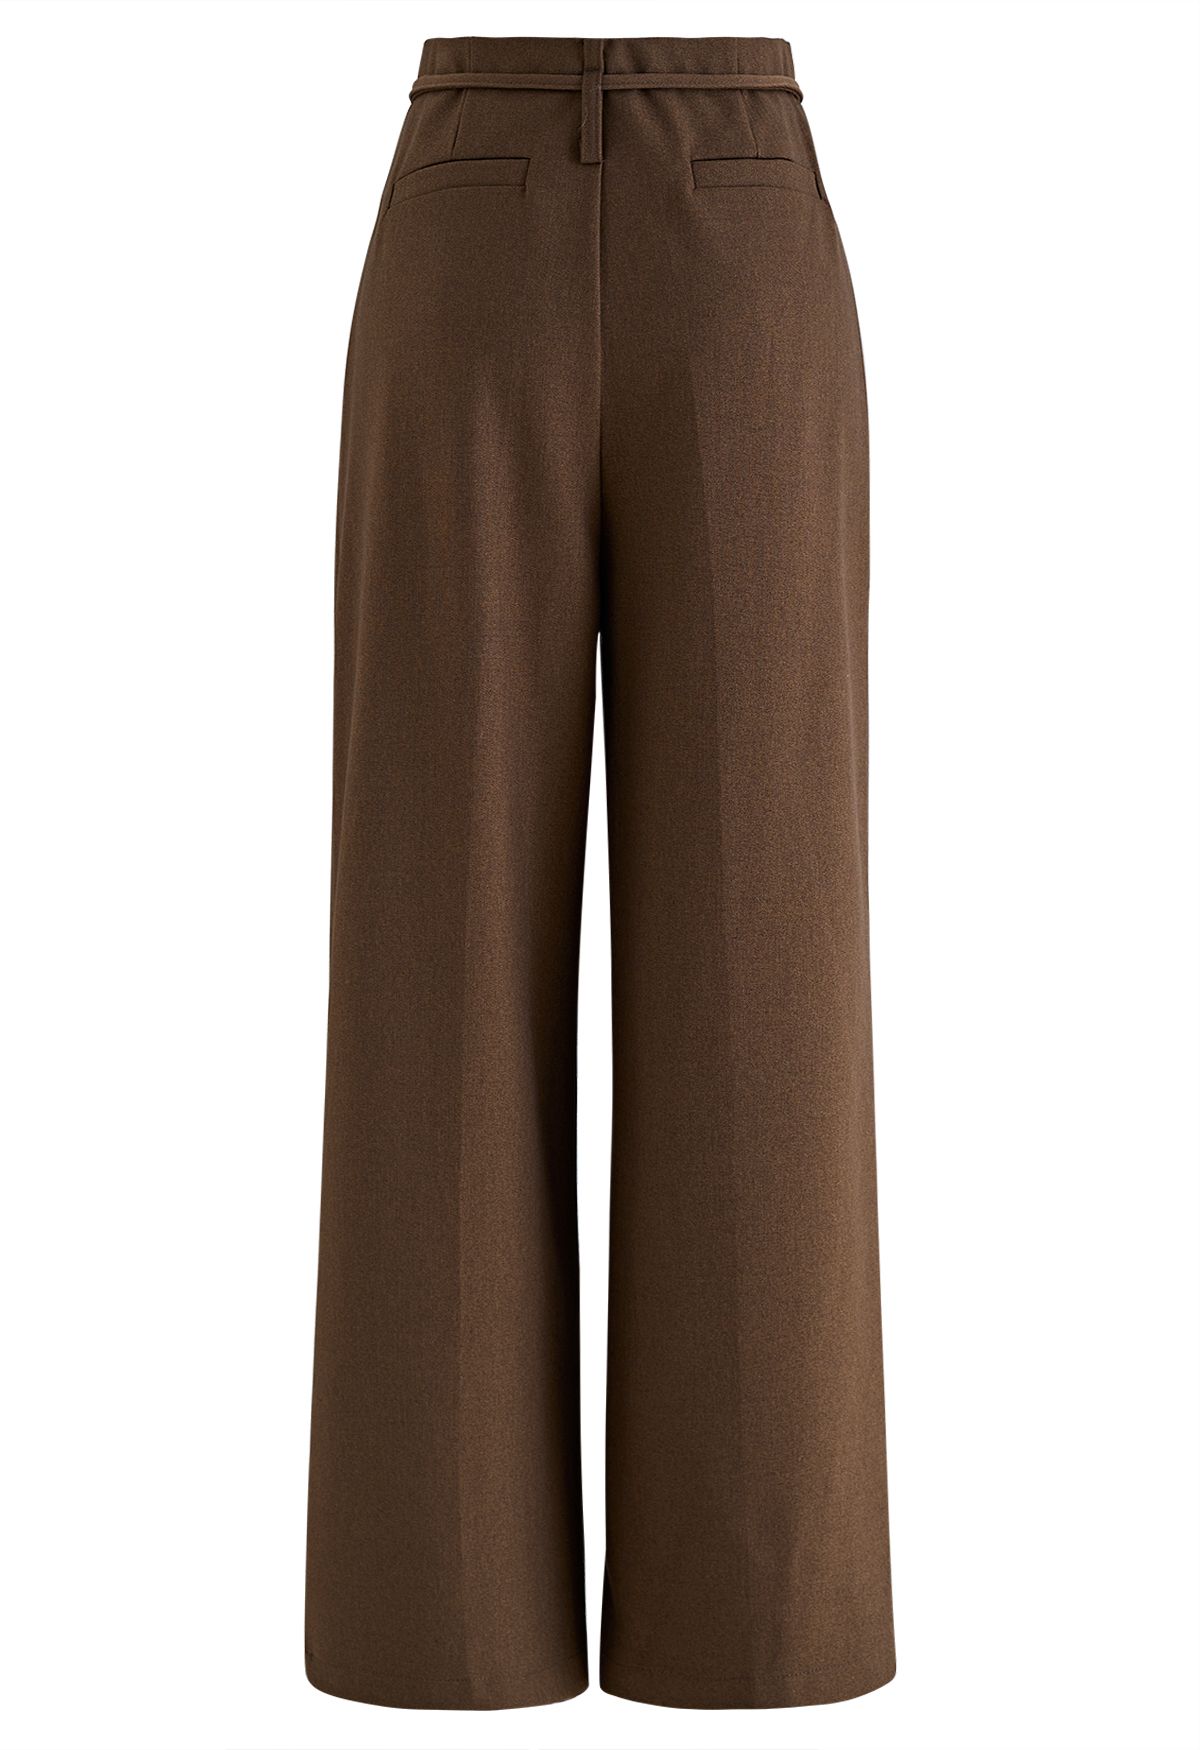 Tie Waist Wide-Leg Pants in Brown - Retro, Indie and Unique Fashion